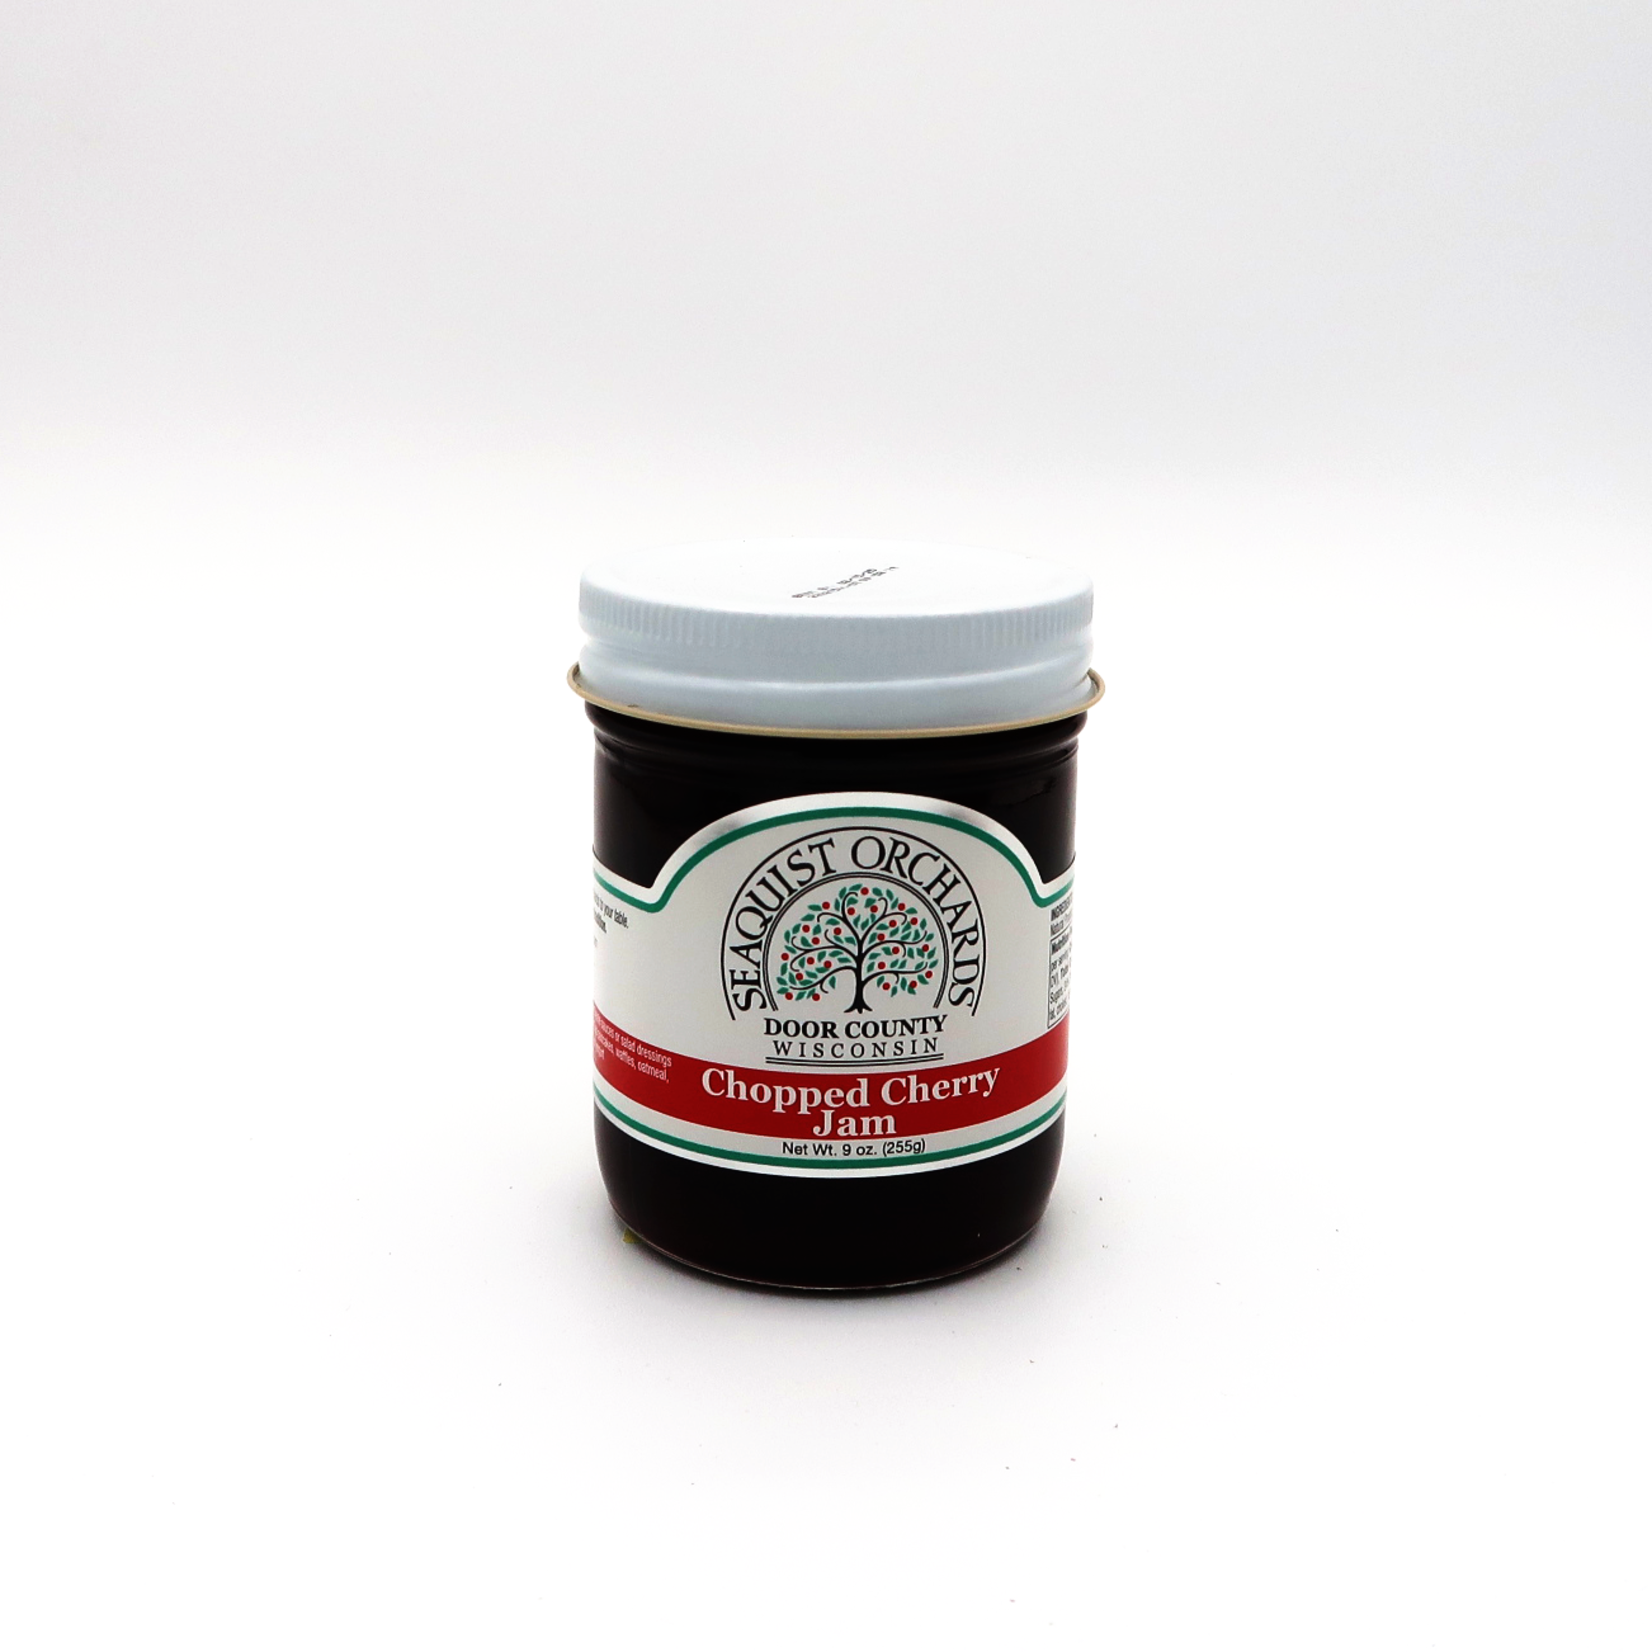 Seaquist Orchards Seaquist Orchard Chopped Cherry Jam